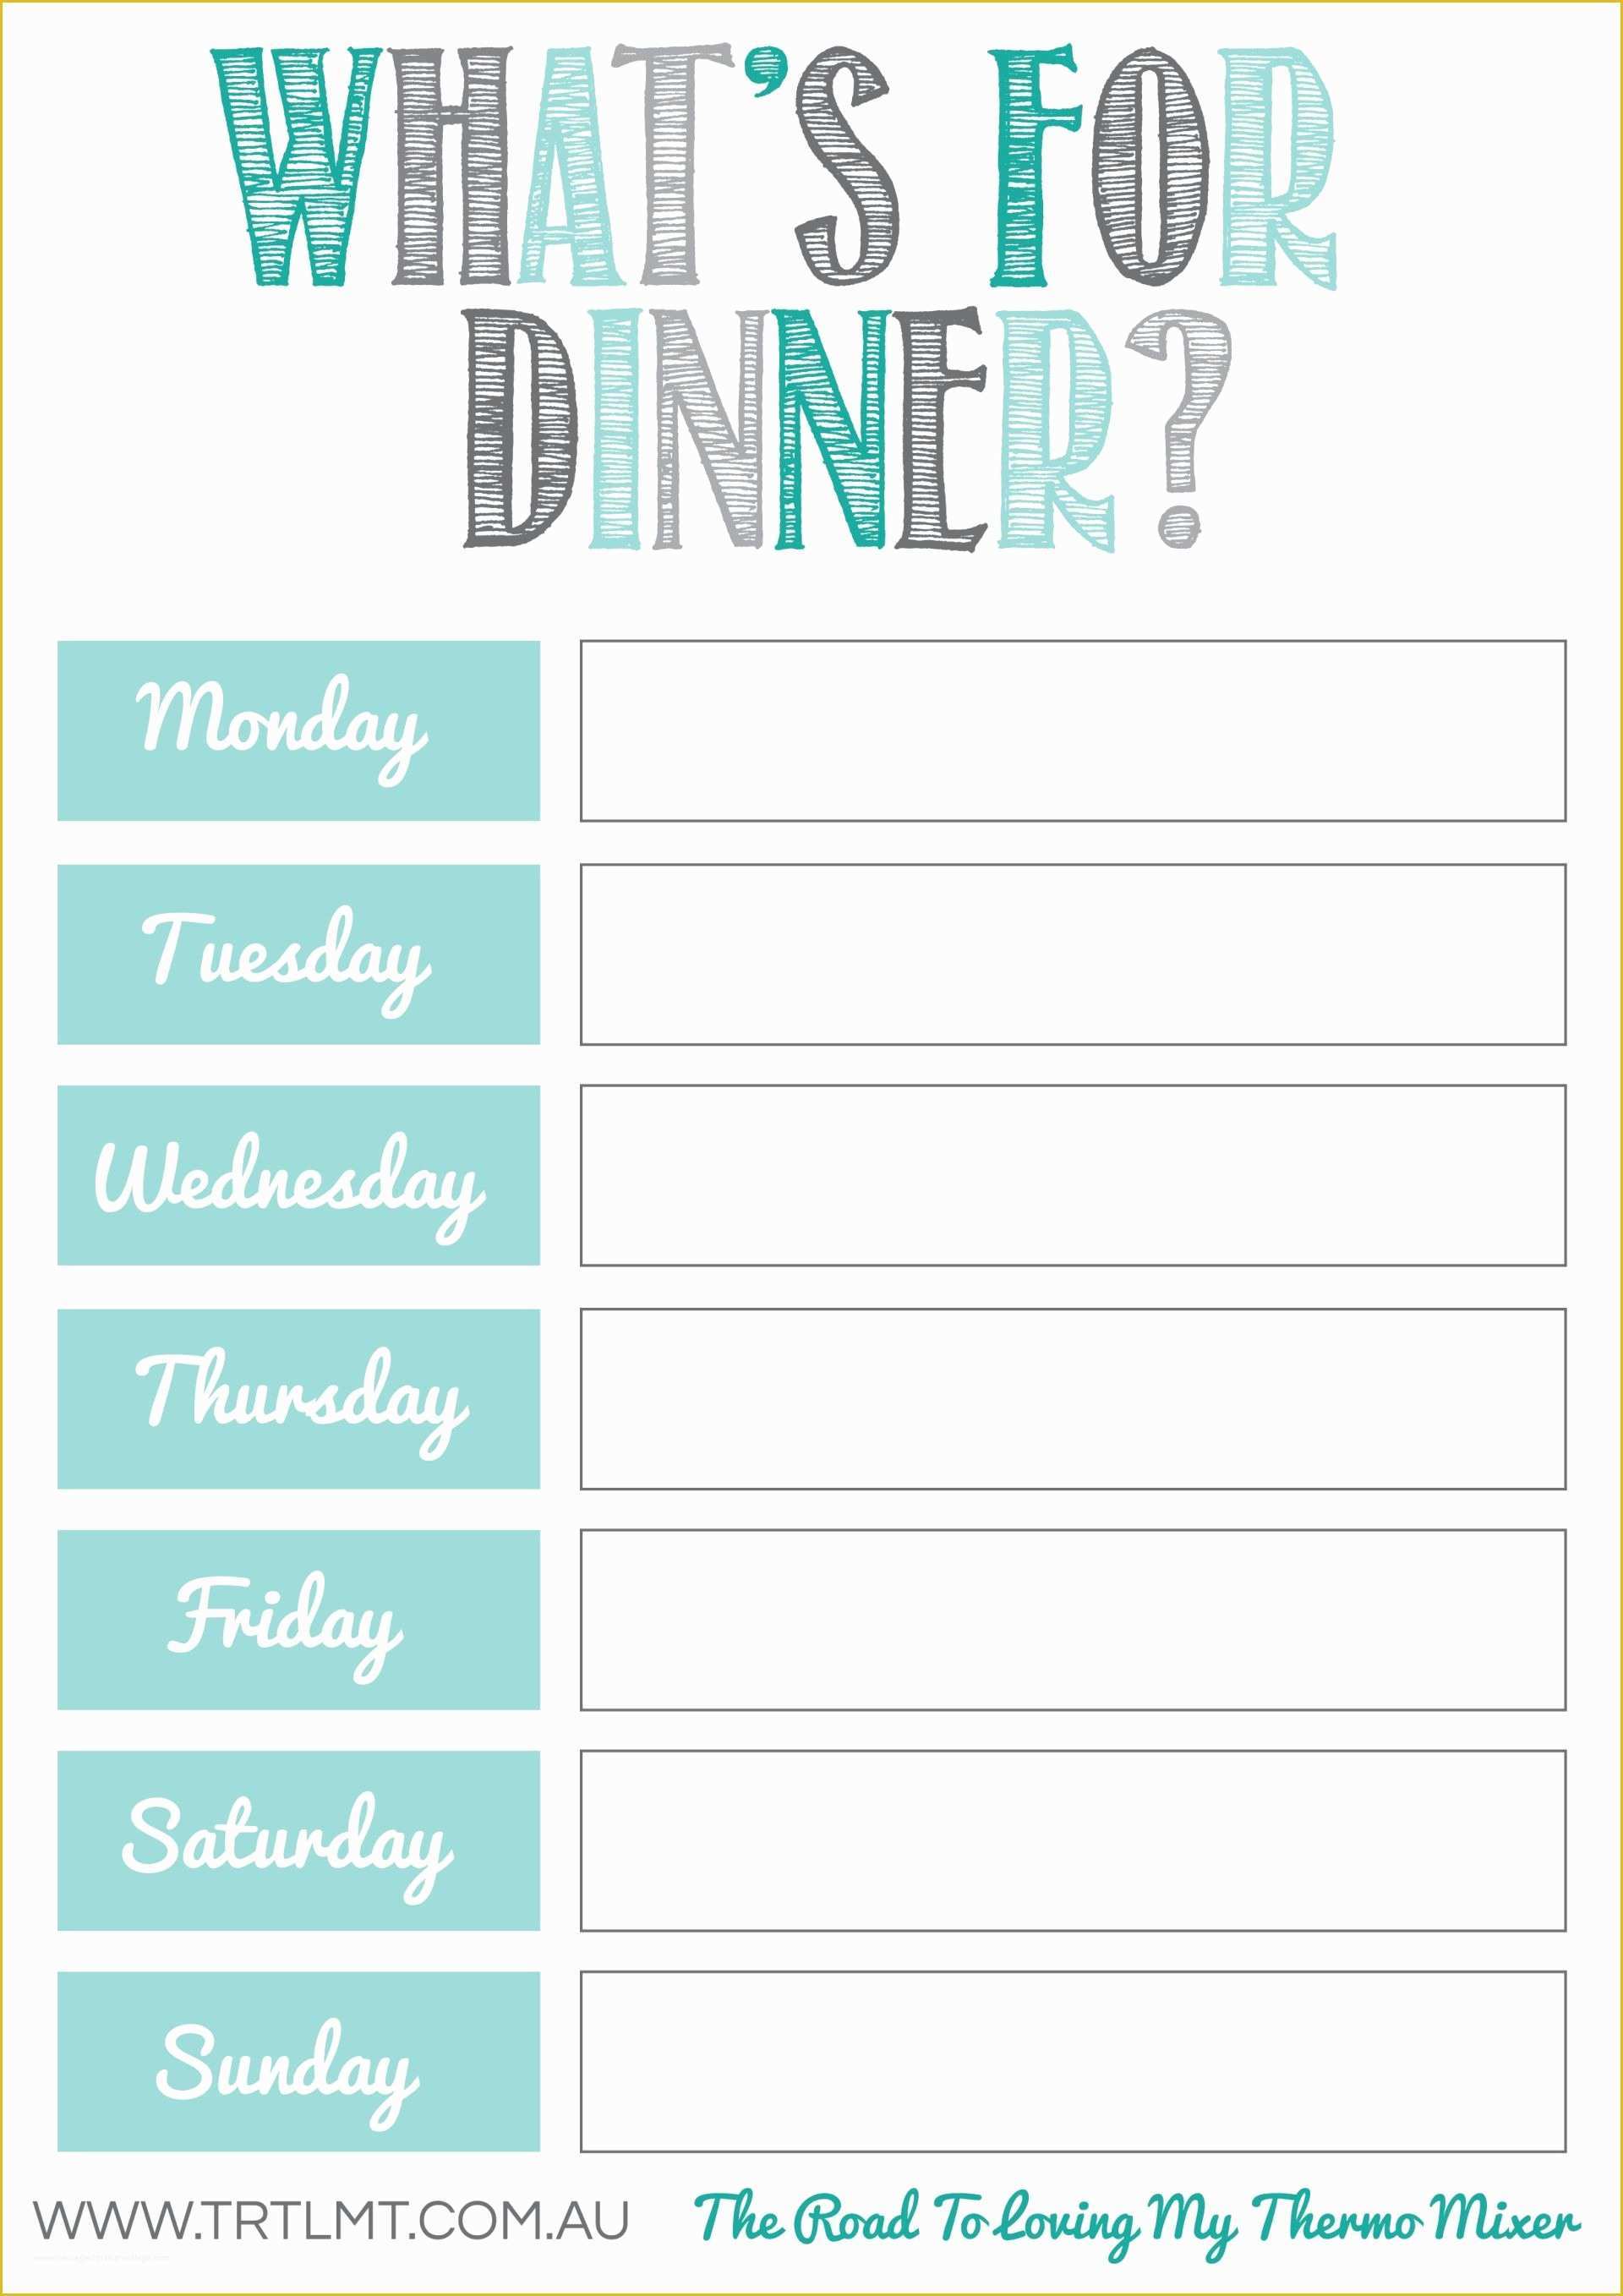 image-result-for-weekly-meal-planner-template-word-weekly-meal